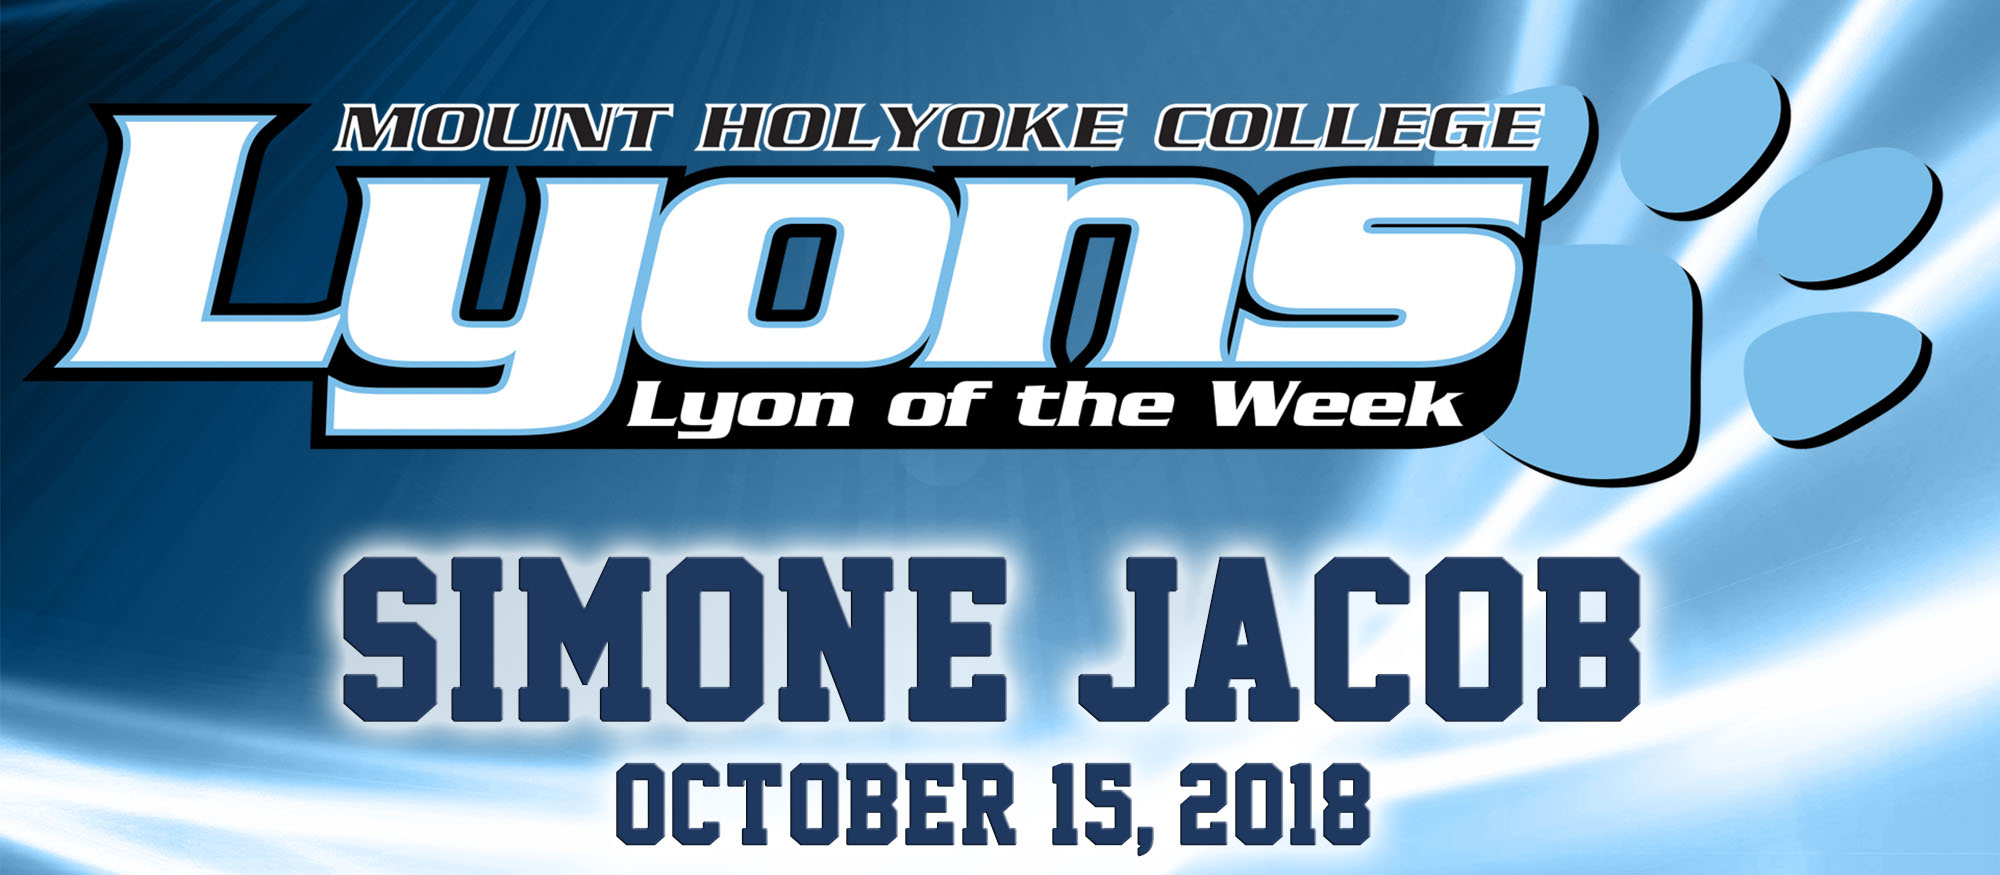 Graphic for the Lyon of the Week for October 15, 2018, Cross Country's Simone Jacob.